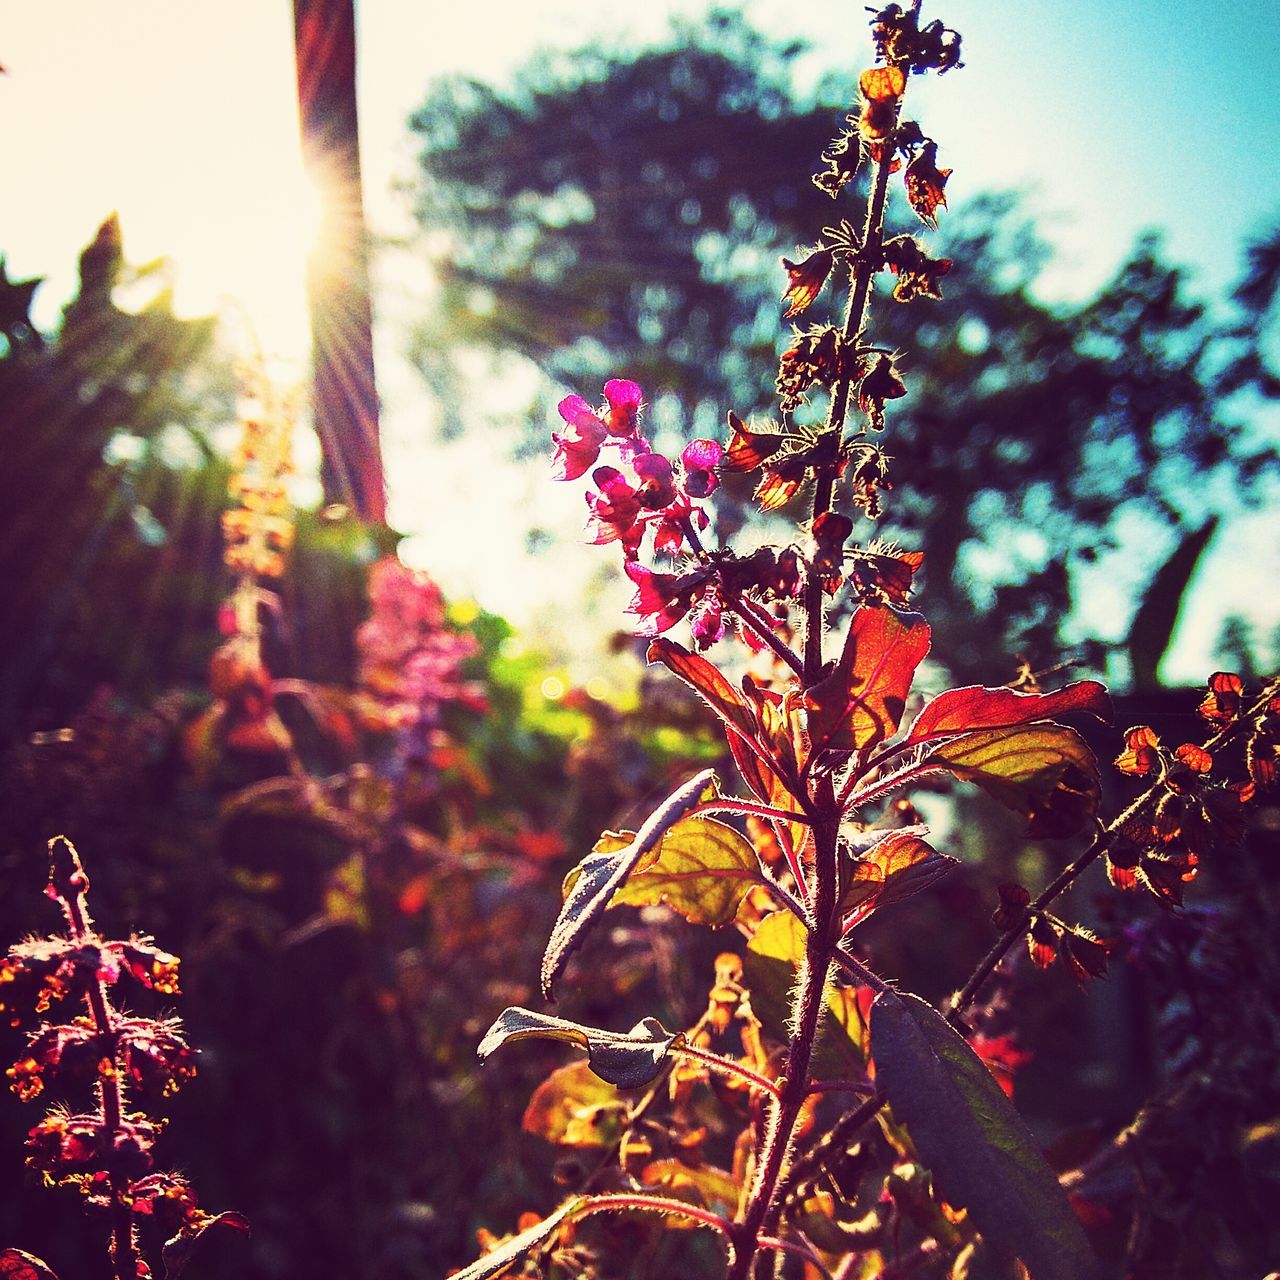 growth, red, focus on foreground, flower, close-up, plant, freshness, nature, beauty in nature, fragility, sunlight, leaf, tree, branch, outdoors, day, sun, selective focus, stem, growing